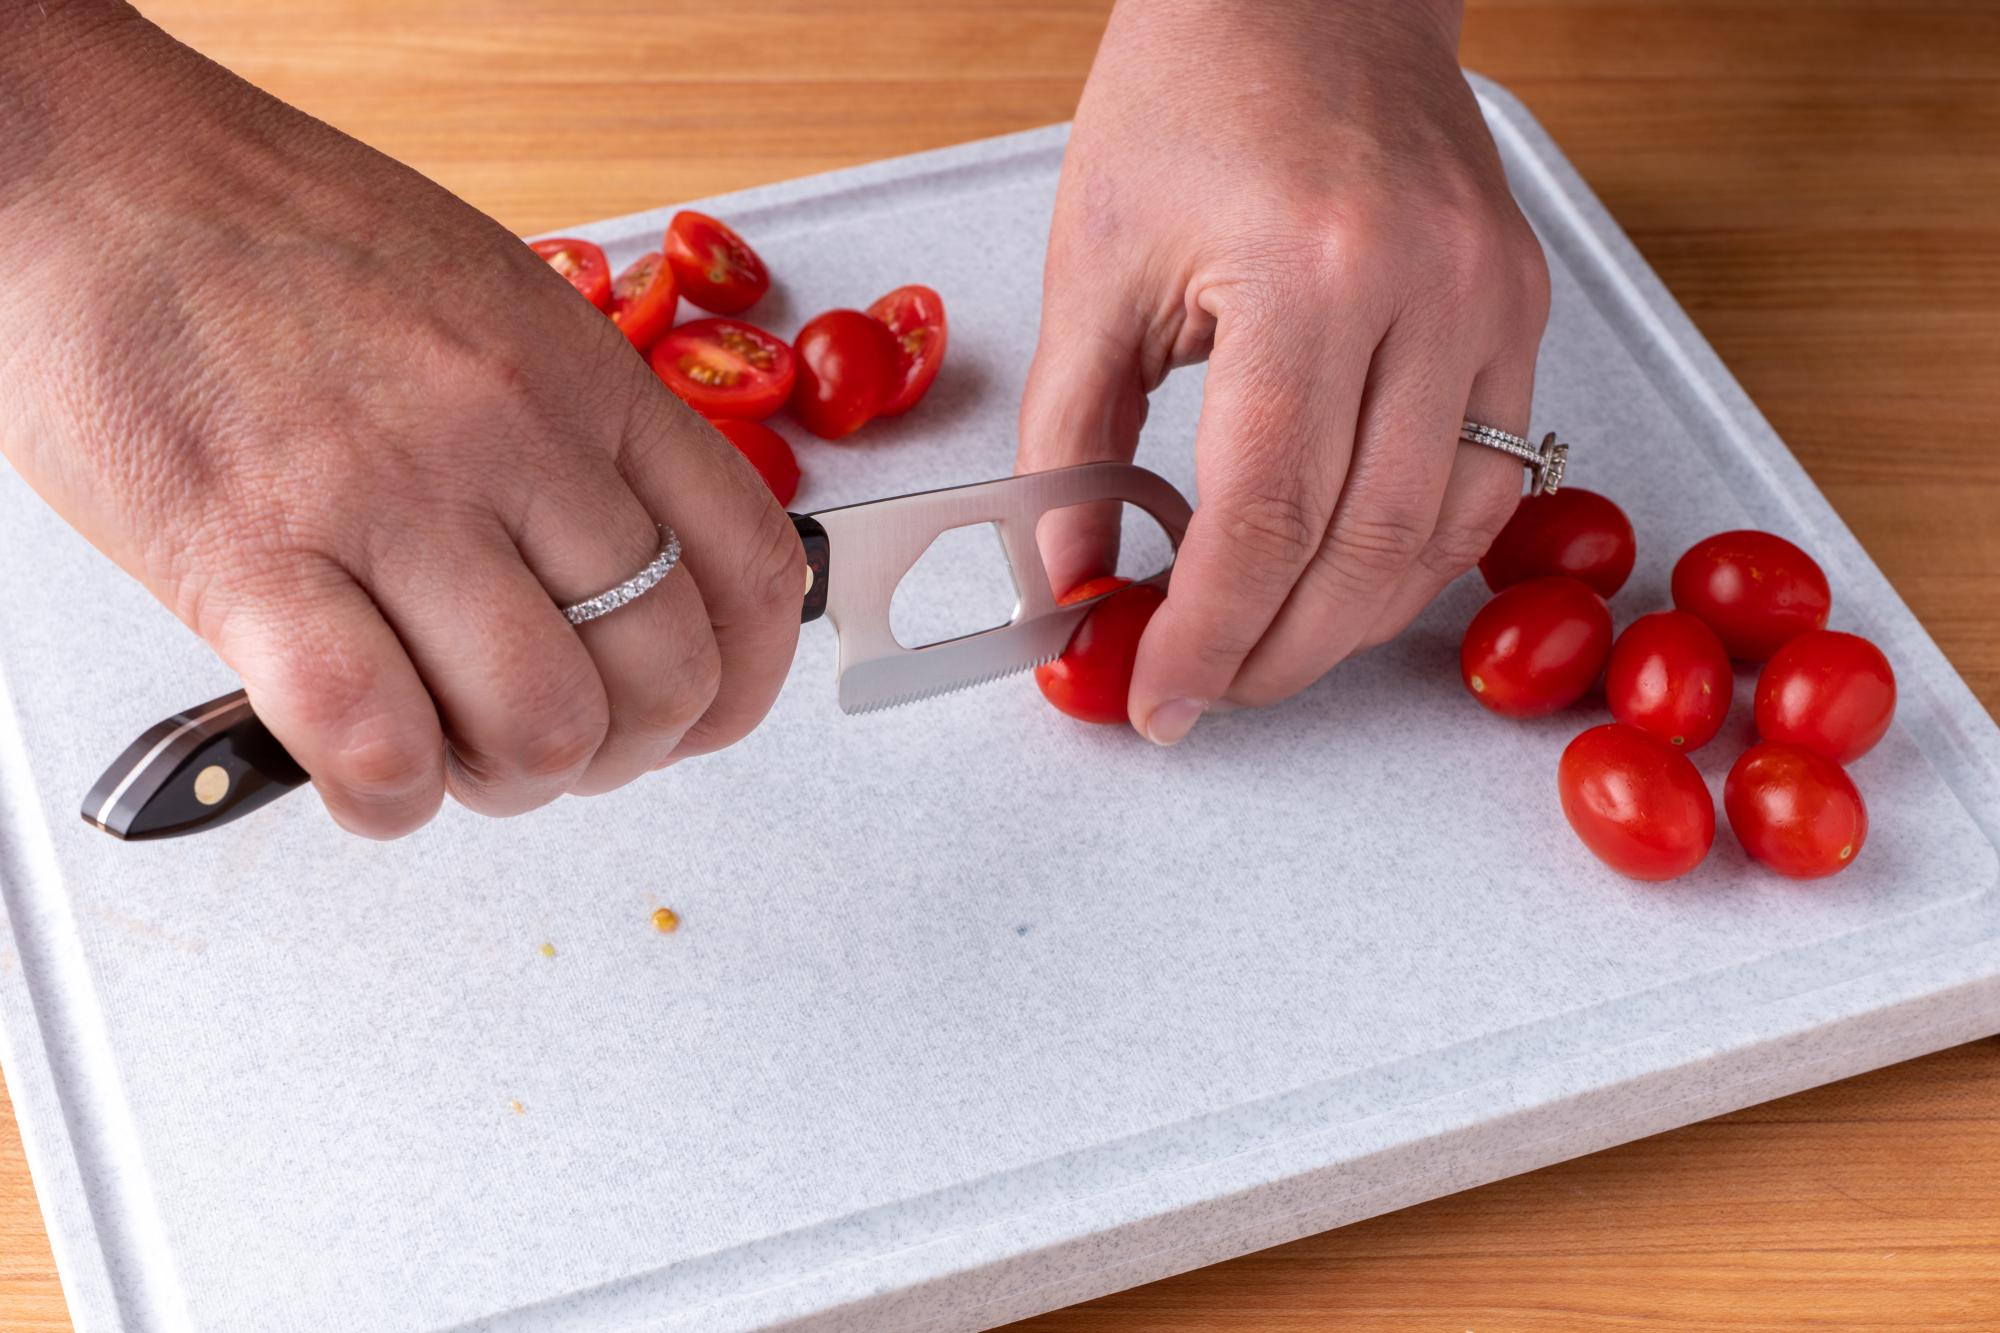 Slicing the cherry tomatoes with a Santoku-Style Cheese Knife.